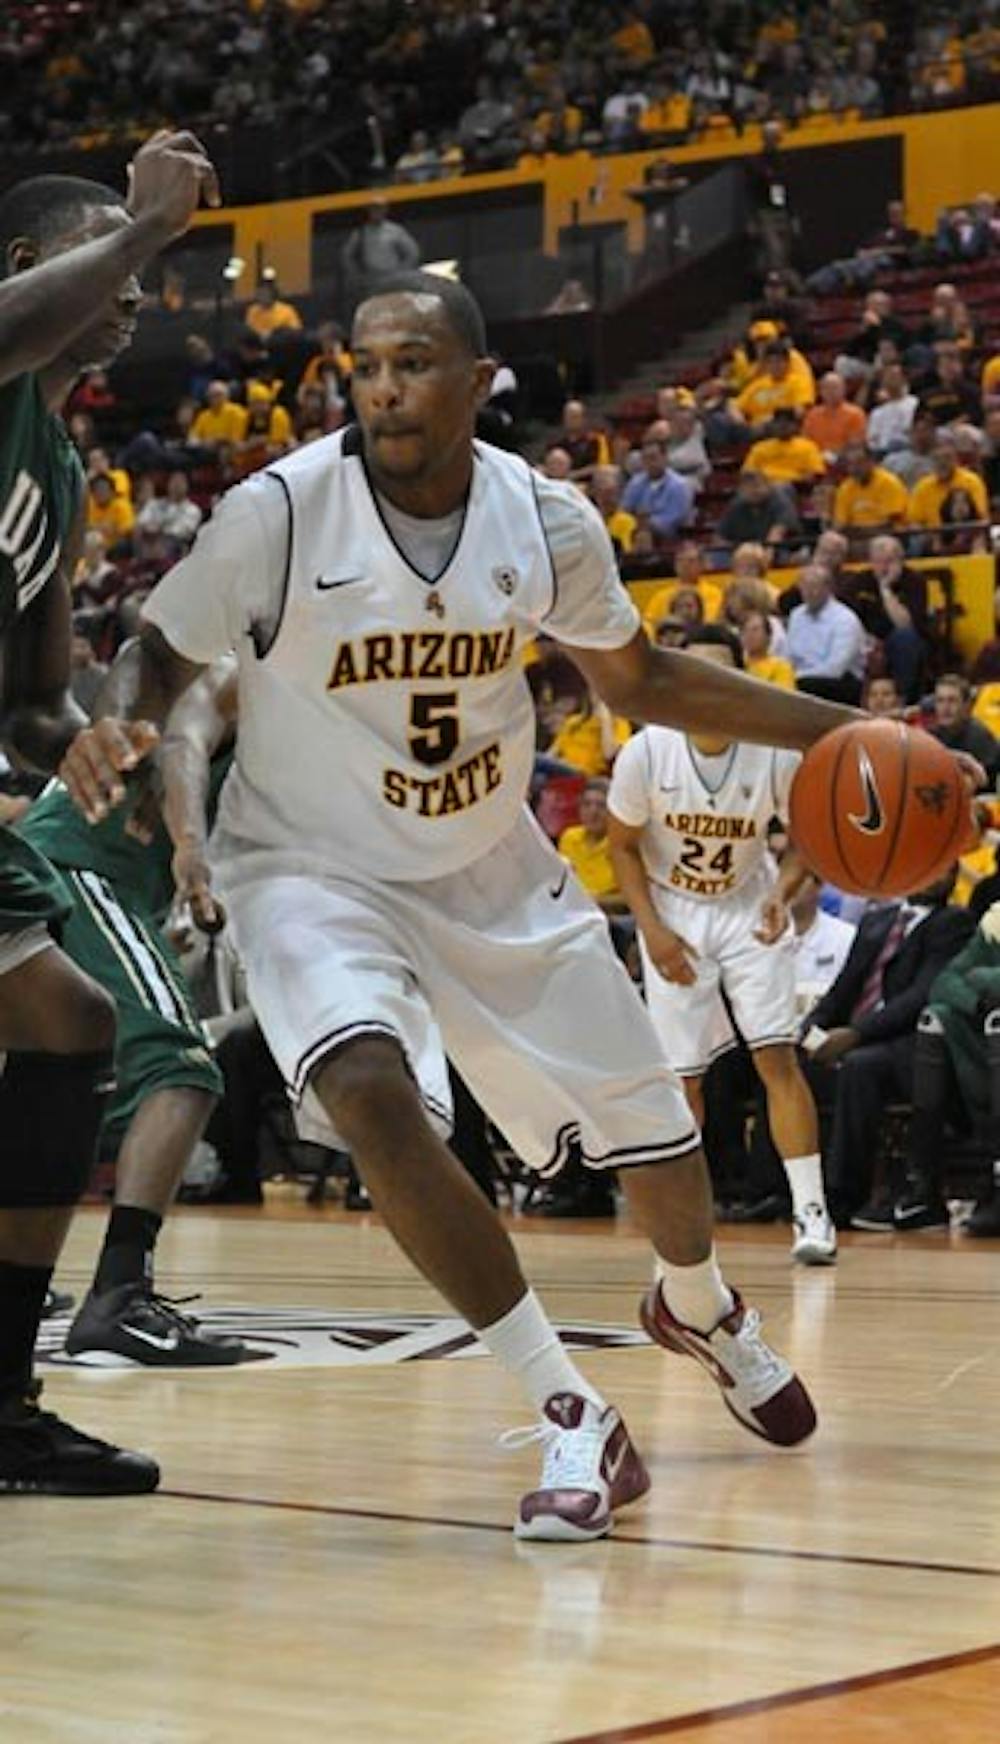 POST POTENTIAL: Freshman forward Kyle Cain tries to get to the basket against UAB earlier this season. Cain has started getting significant minutes at center with sophomore Ruslan Pateev struggling. Cain's 17 rebounds against Houston Baptist were the most by an ASU player since 2007. (Photo by Aaron Lavinsky)